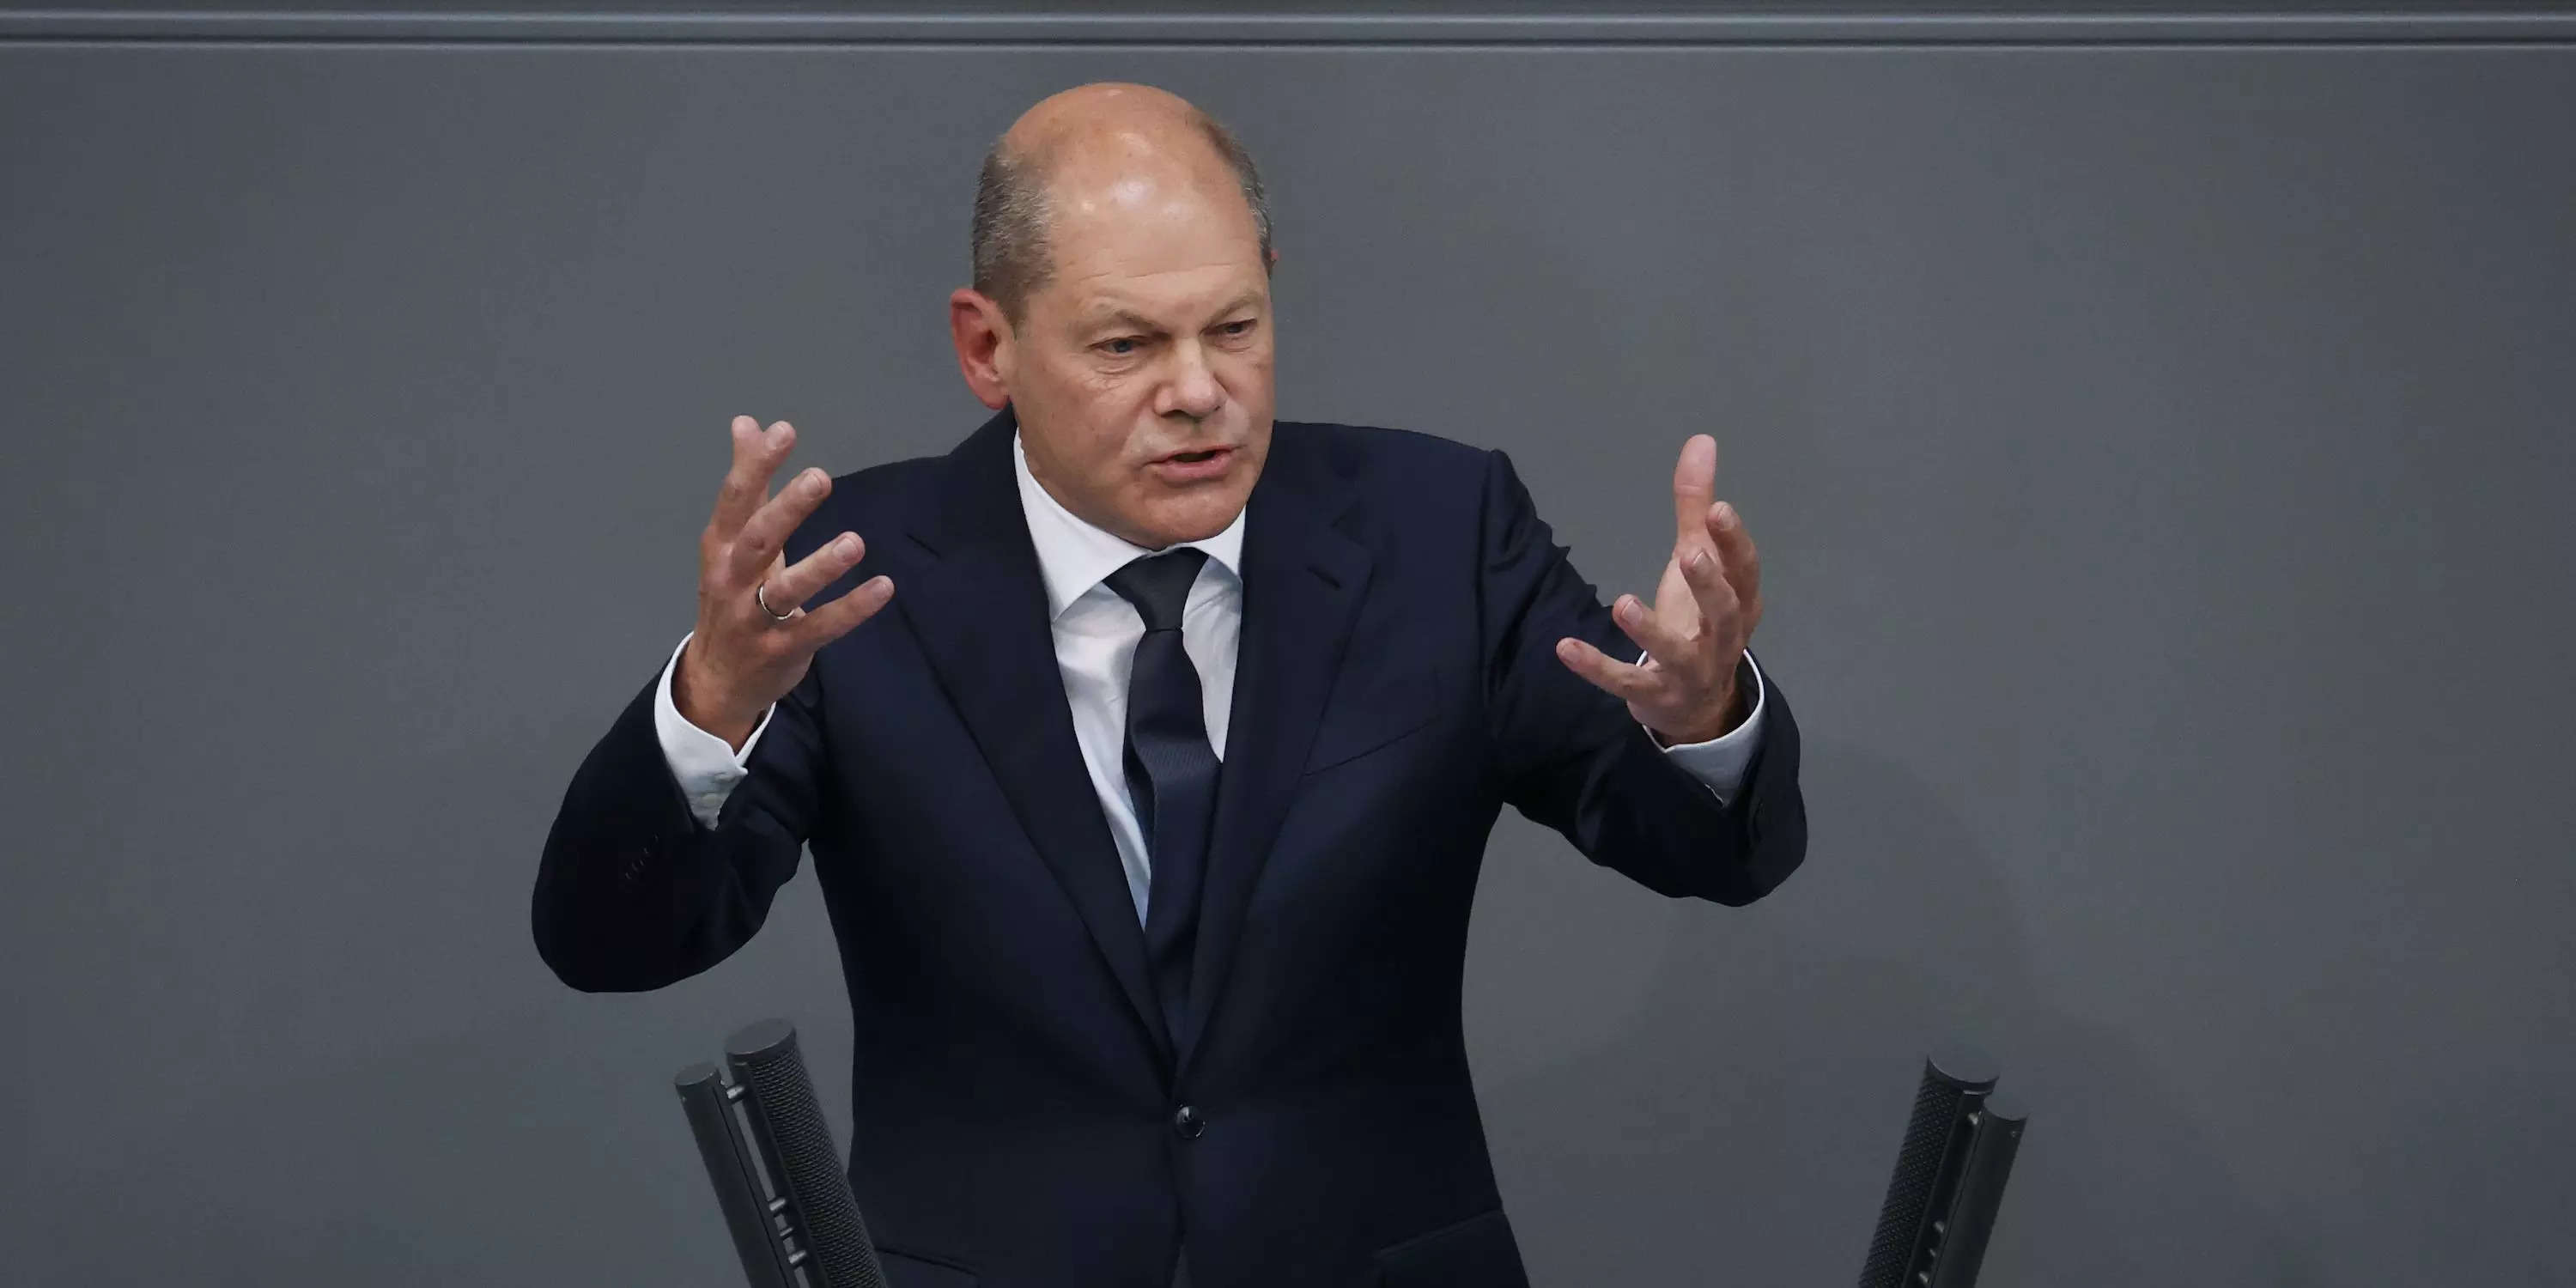 Germany’s takeover of Russian refineries frees the nation from dependence on Moscow, says Chancellor Olaf Scholz